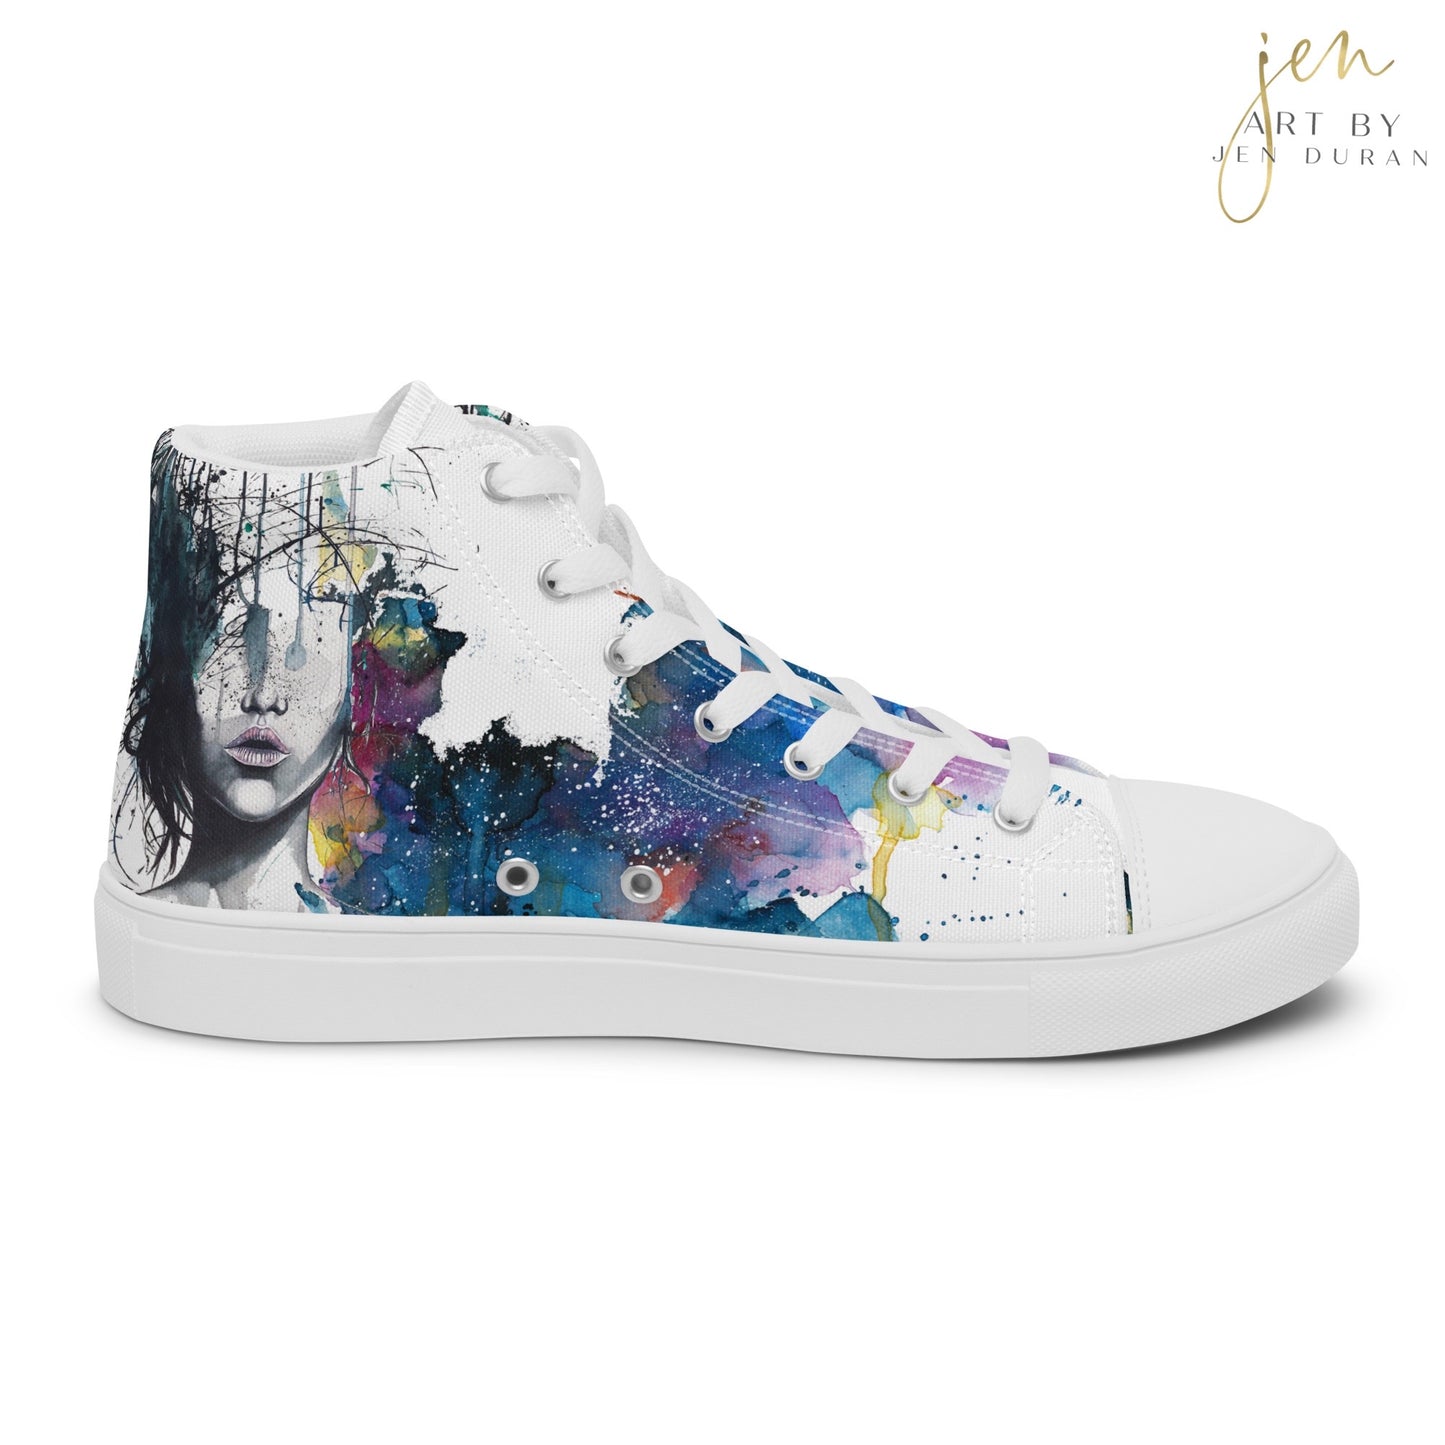 high top shoes, high top sneakers, canvas shoes, trendy shoes, watercolor design, popular shoes, unique shoe design, mens shoes, womens shoes, trendy fashion, consumed by chaos, art by jen duran